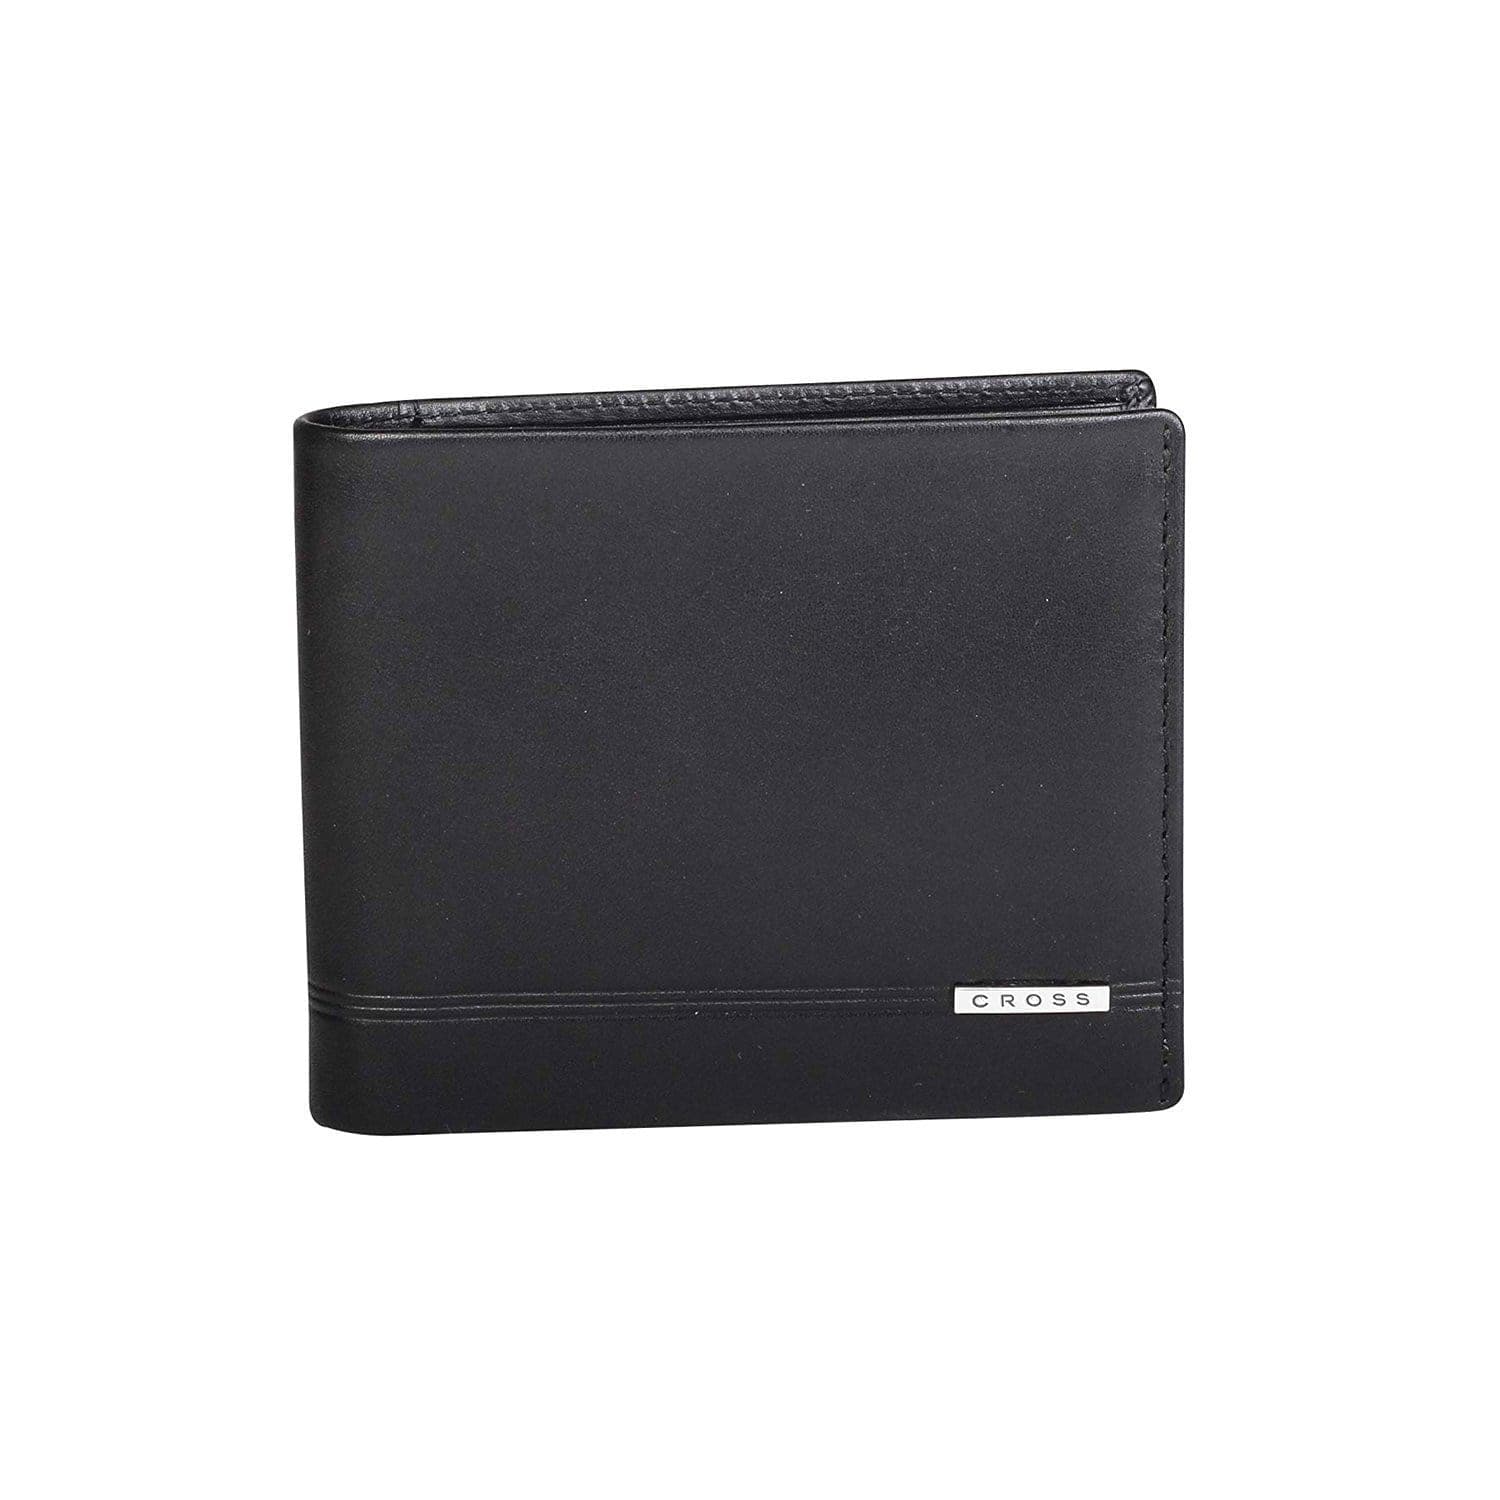 Cross Classic Century Bifold Coin Leather Wallet - Black - AC018072-1-1-RB - Jashanmal Home